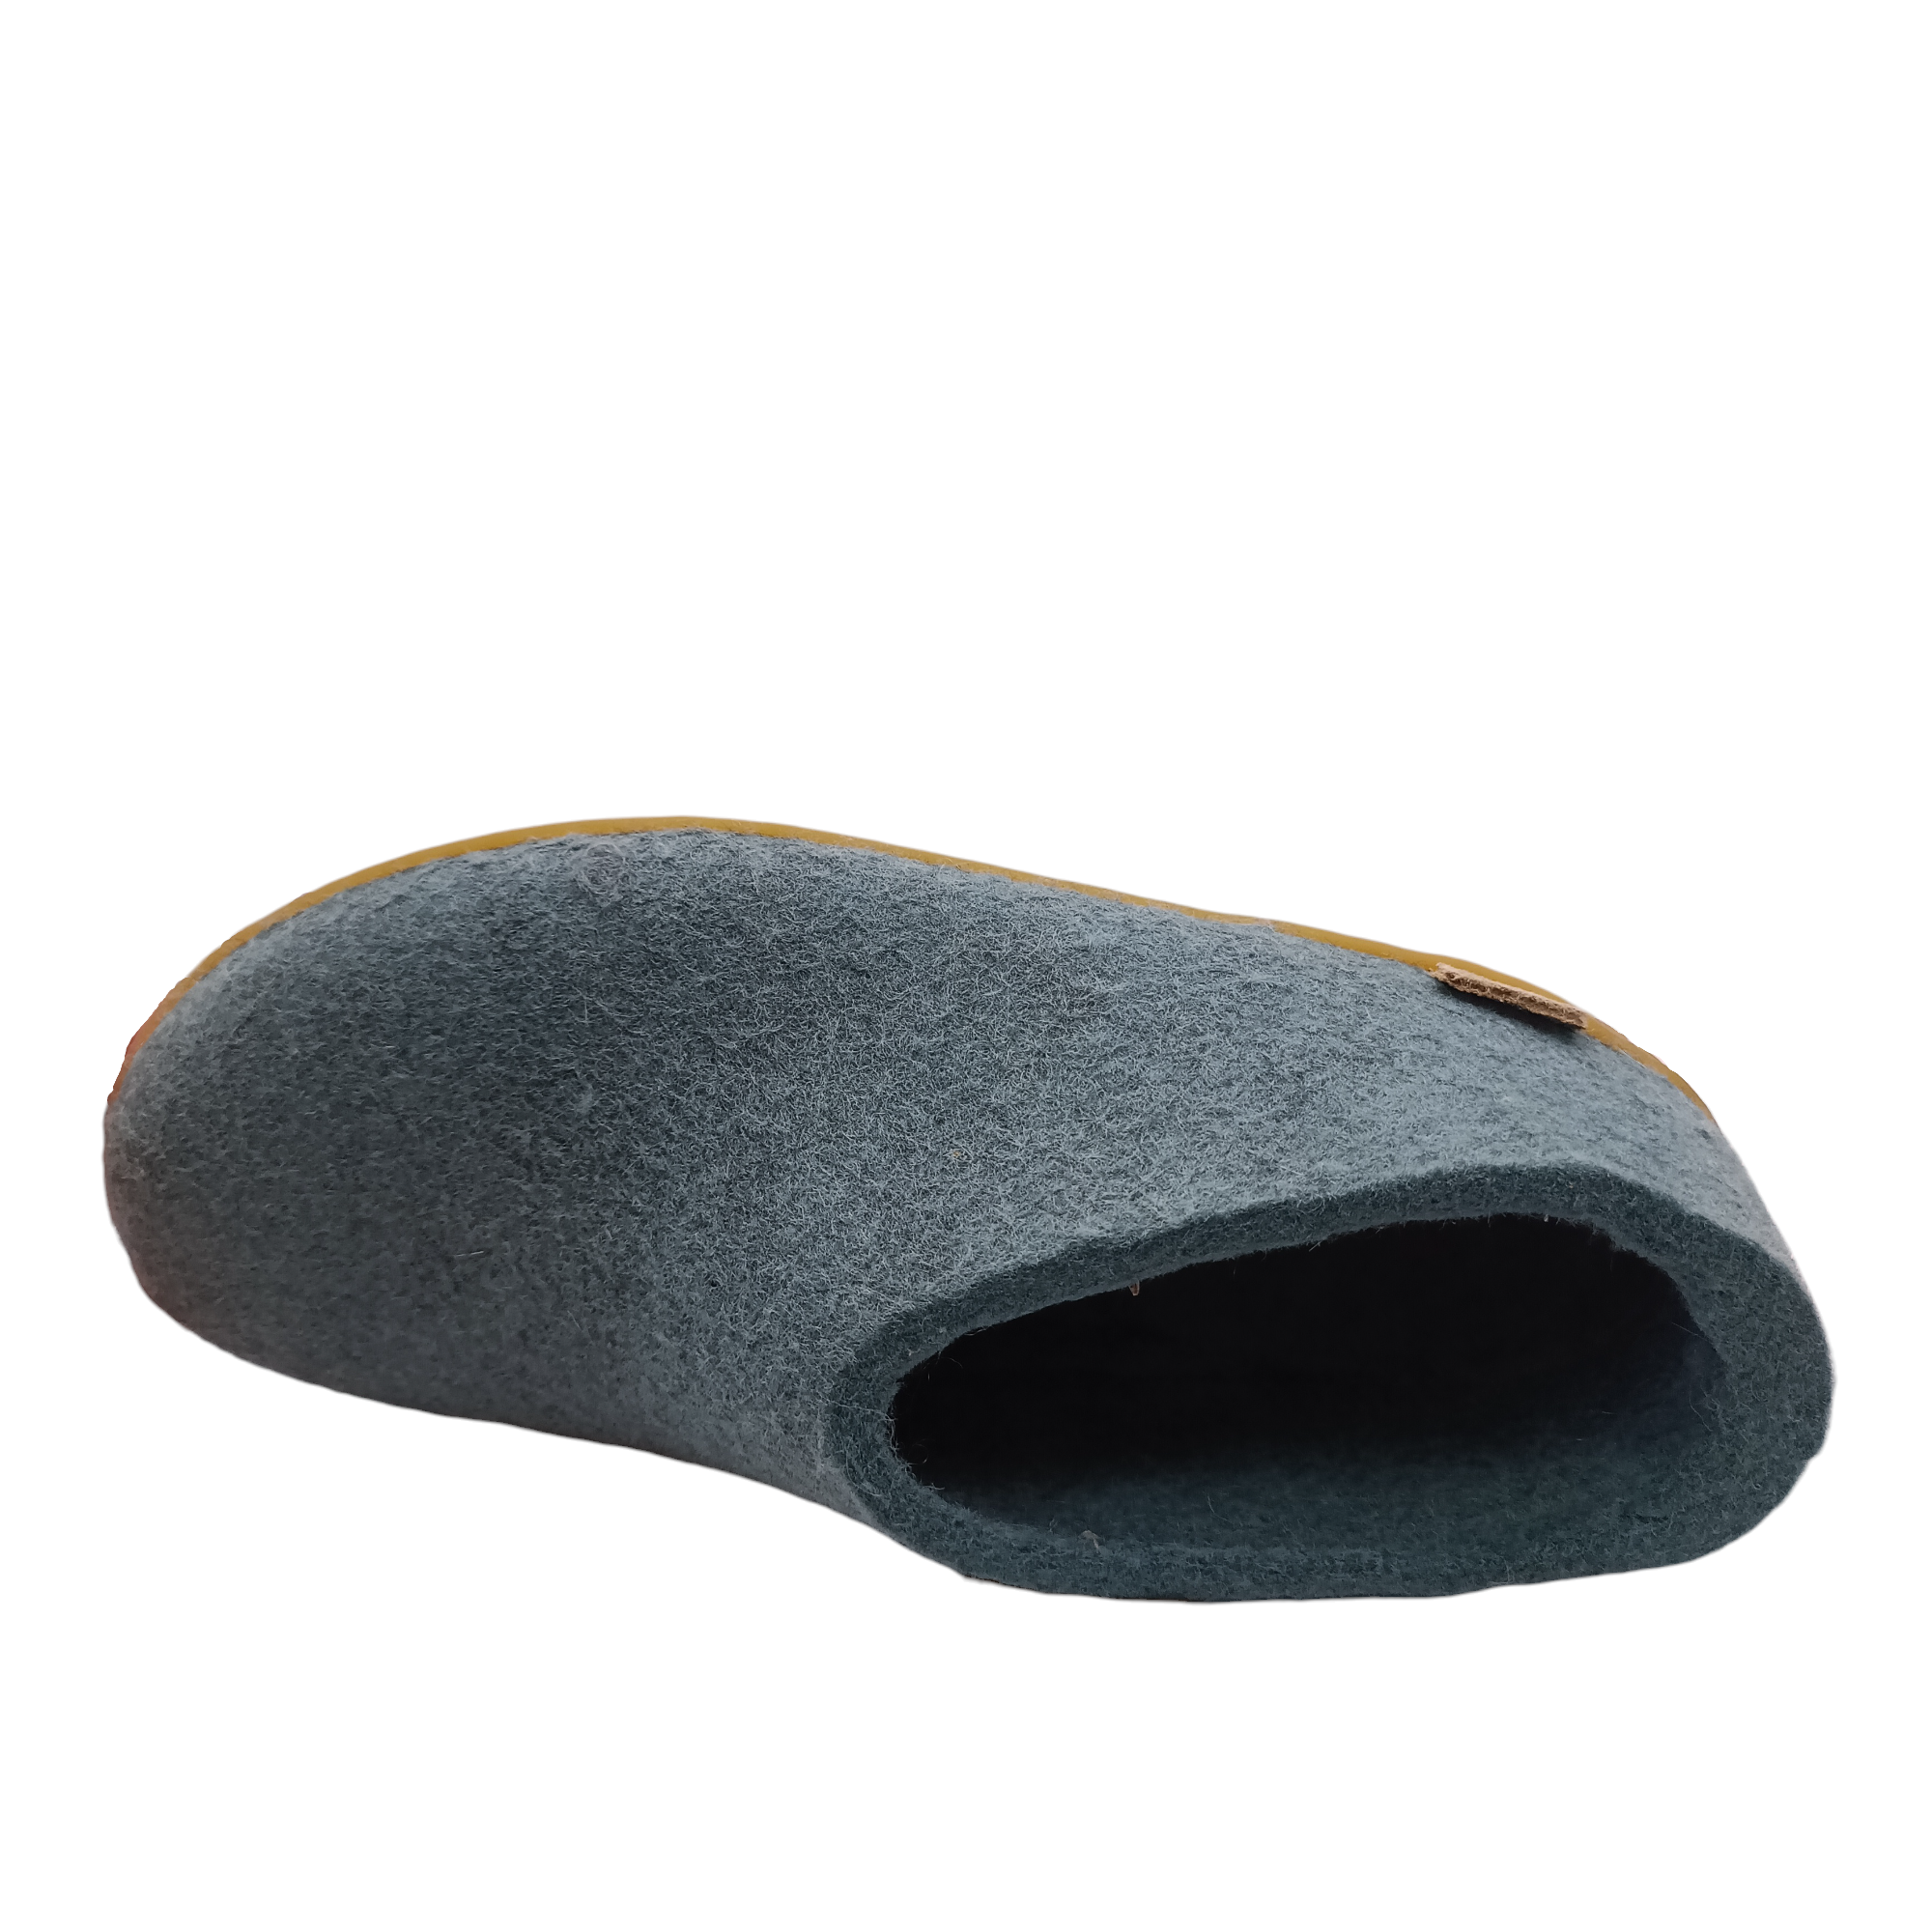 Top view off north sea coloured felt wool Glerup shoe or slipper with natural rubber sole. Shop slippers online and instore with shoe&amp;me Mount Maunganui.